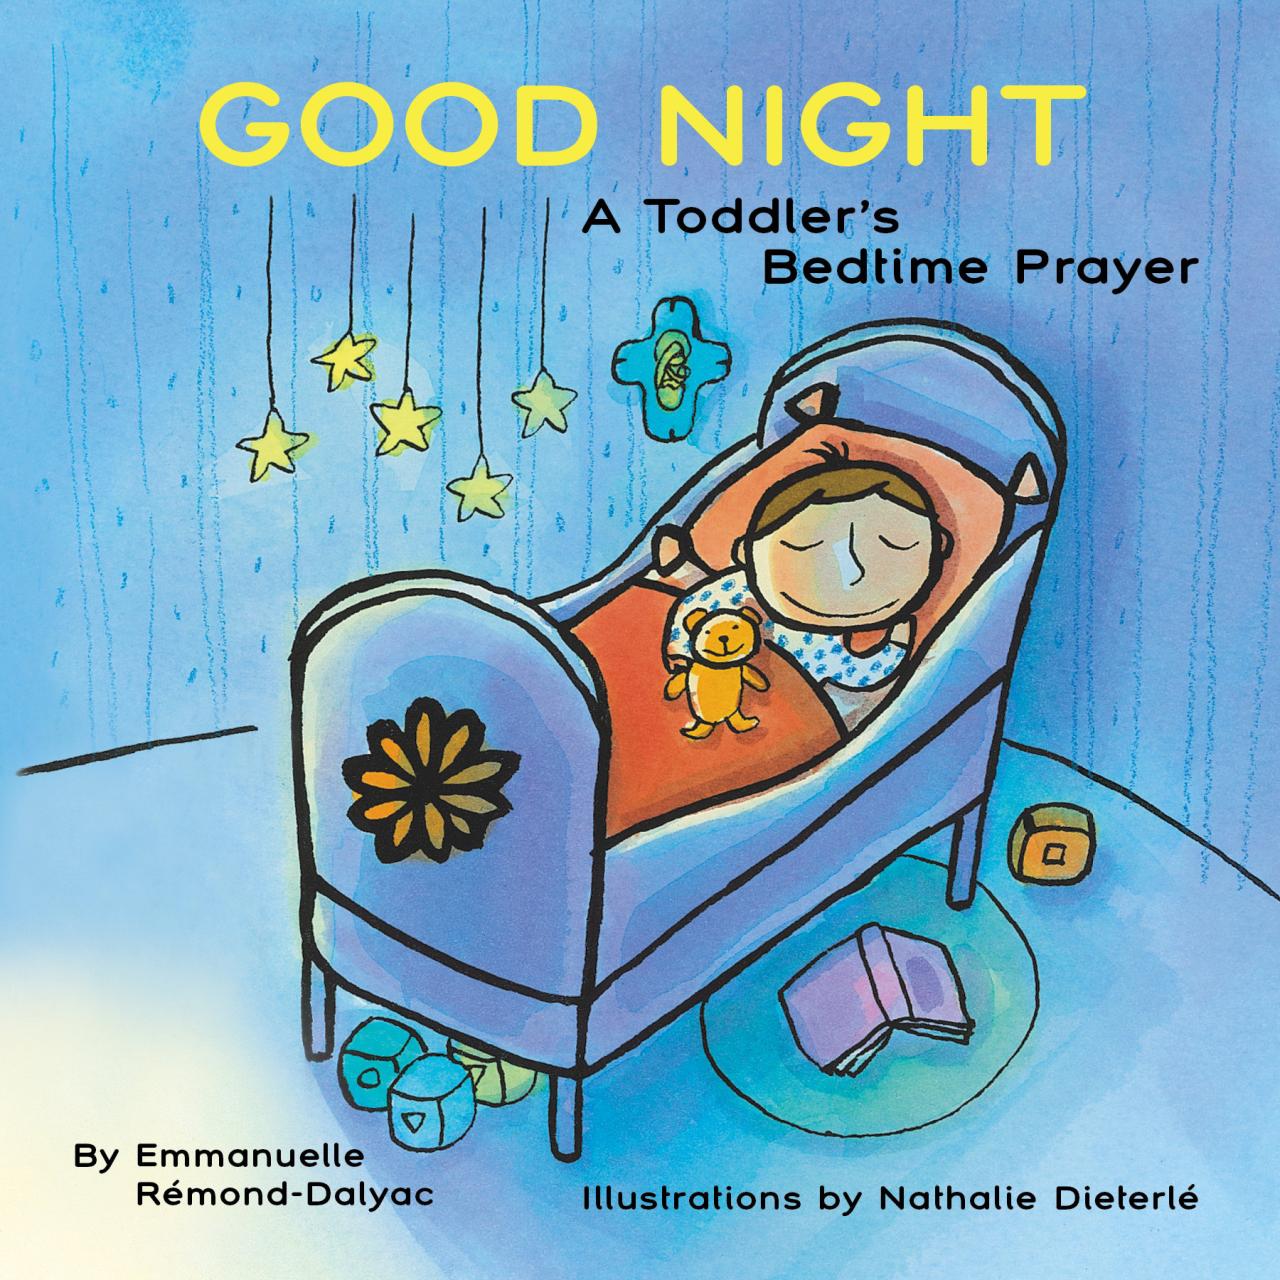 Prayer clipart night praying kids bedtime bed children time cliparts clip team library chart clipartmag stick personal chapel corporate clipground